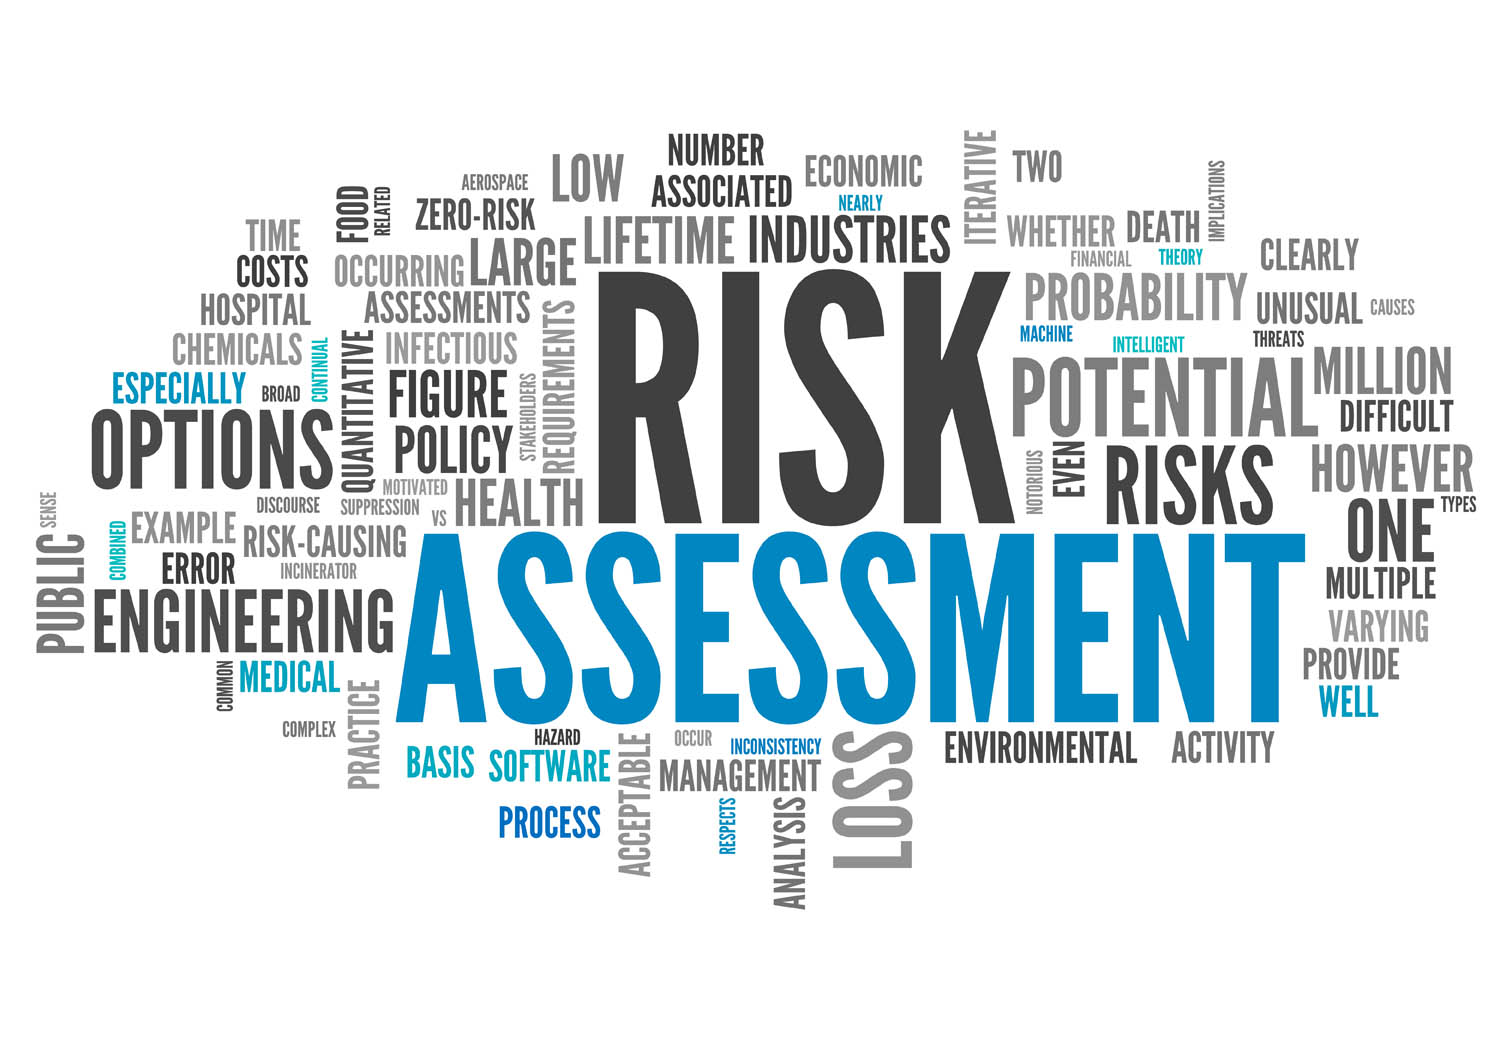 Fire risk assessment services